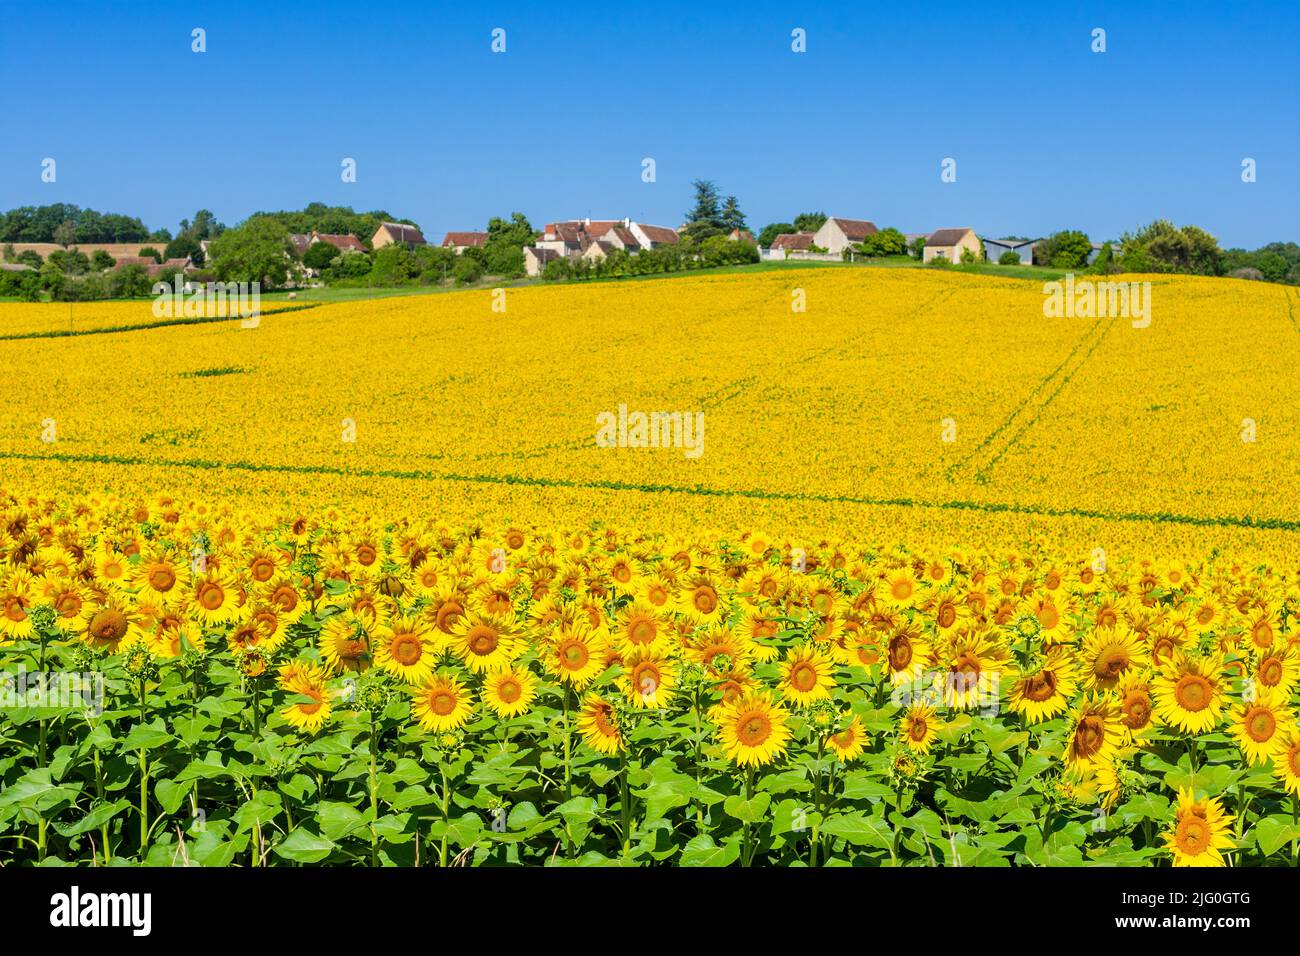 Hill-top village of La Boissiere, Boussay, and field of Sunflowers (Helianthus annuus) growing in the sud-Touraine, central France. Stock Photo